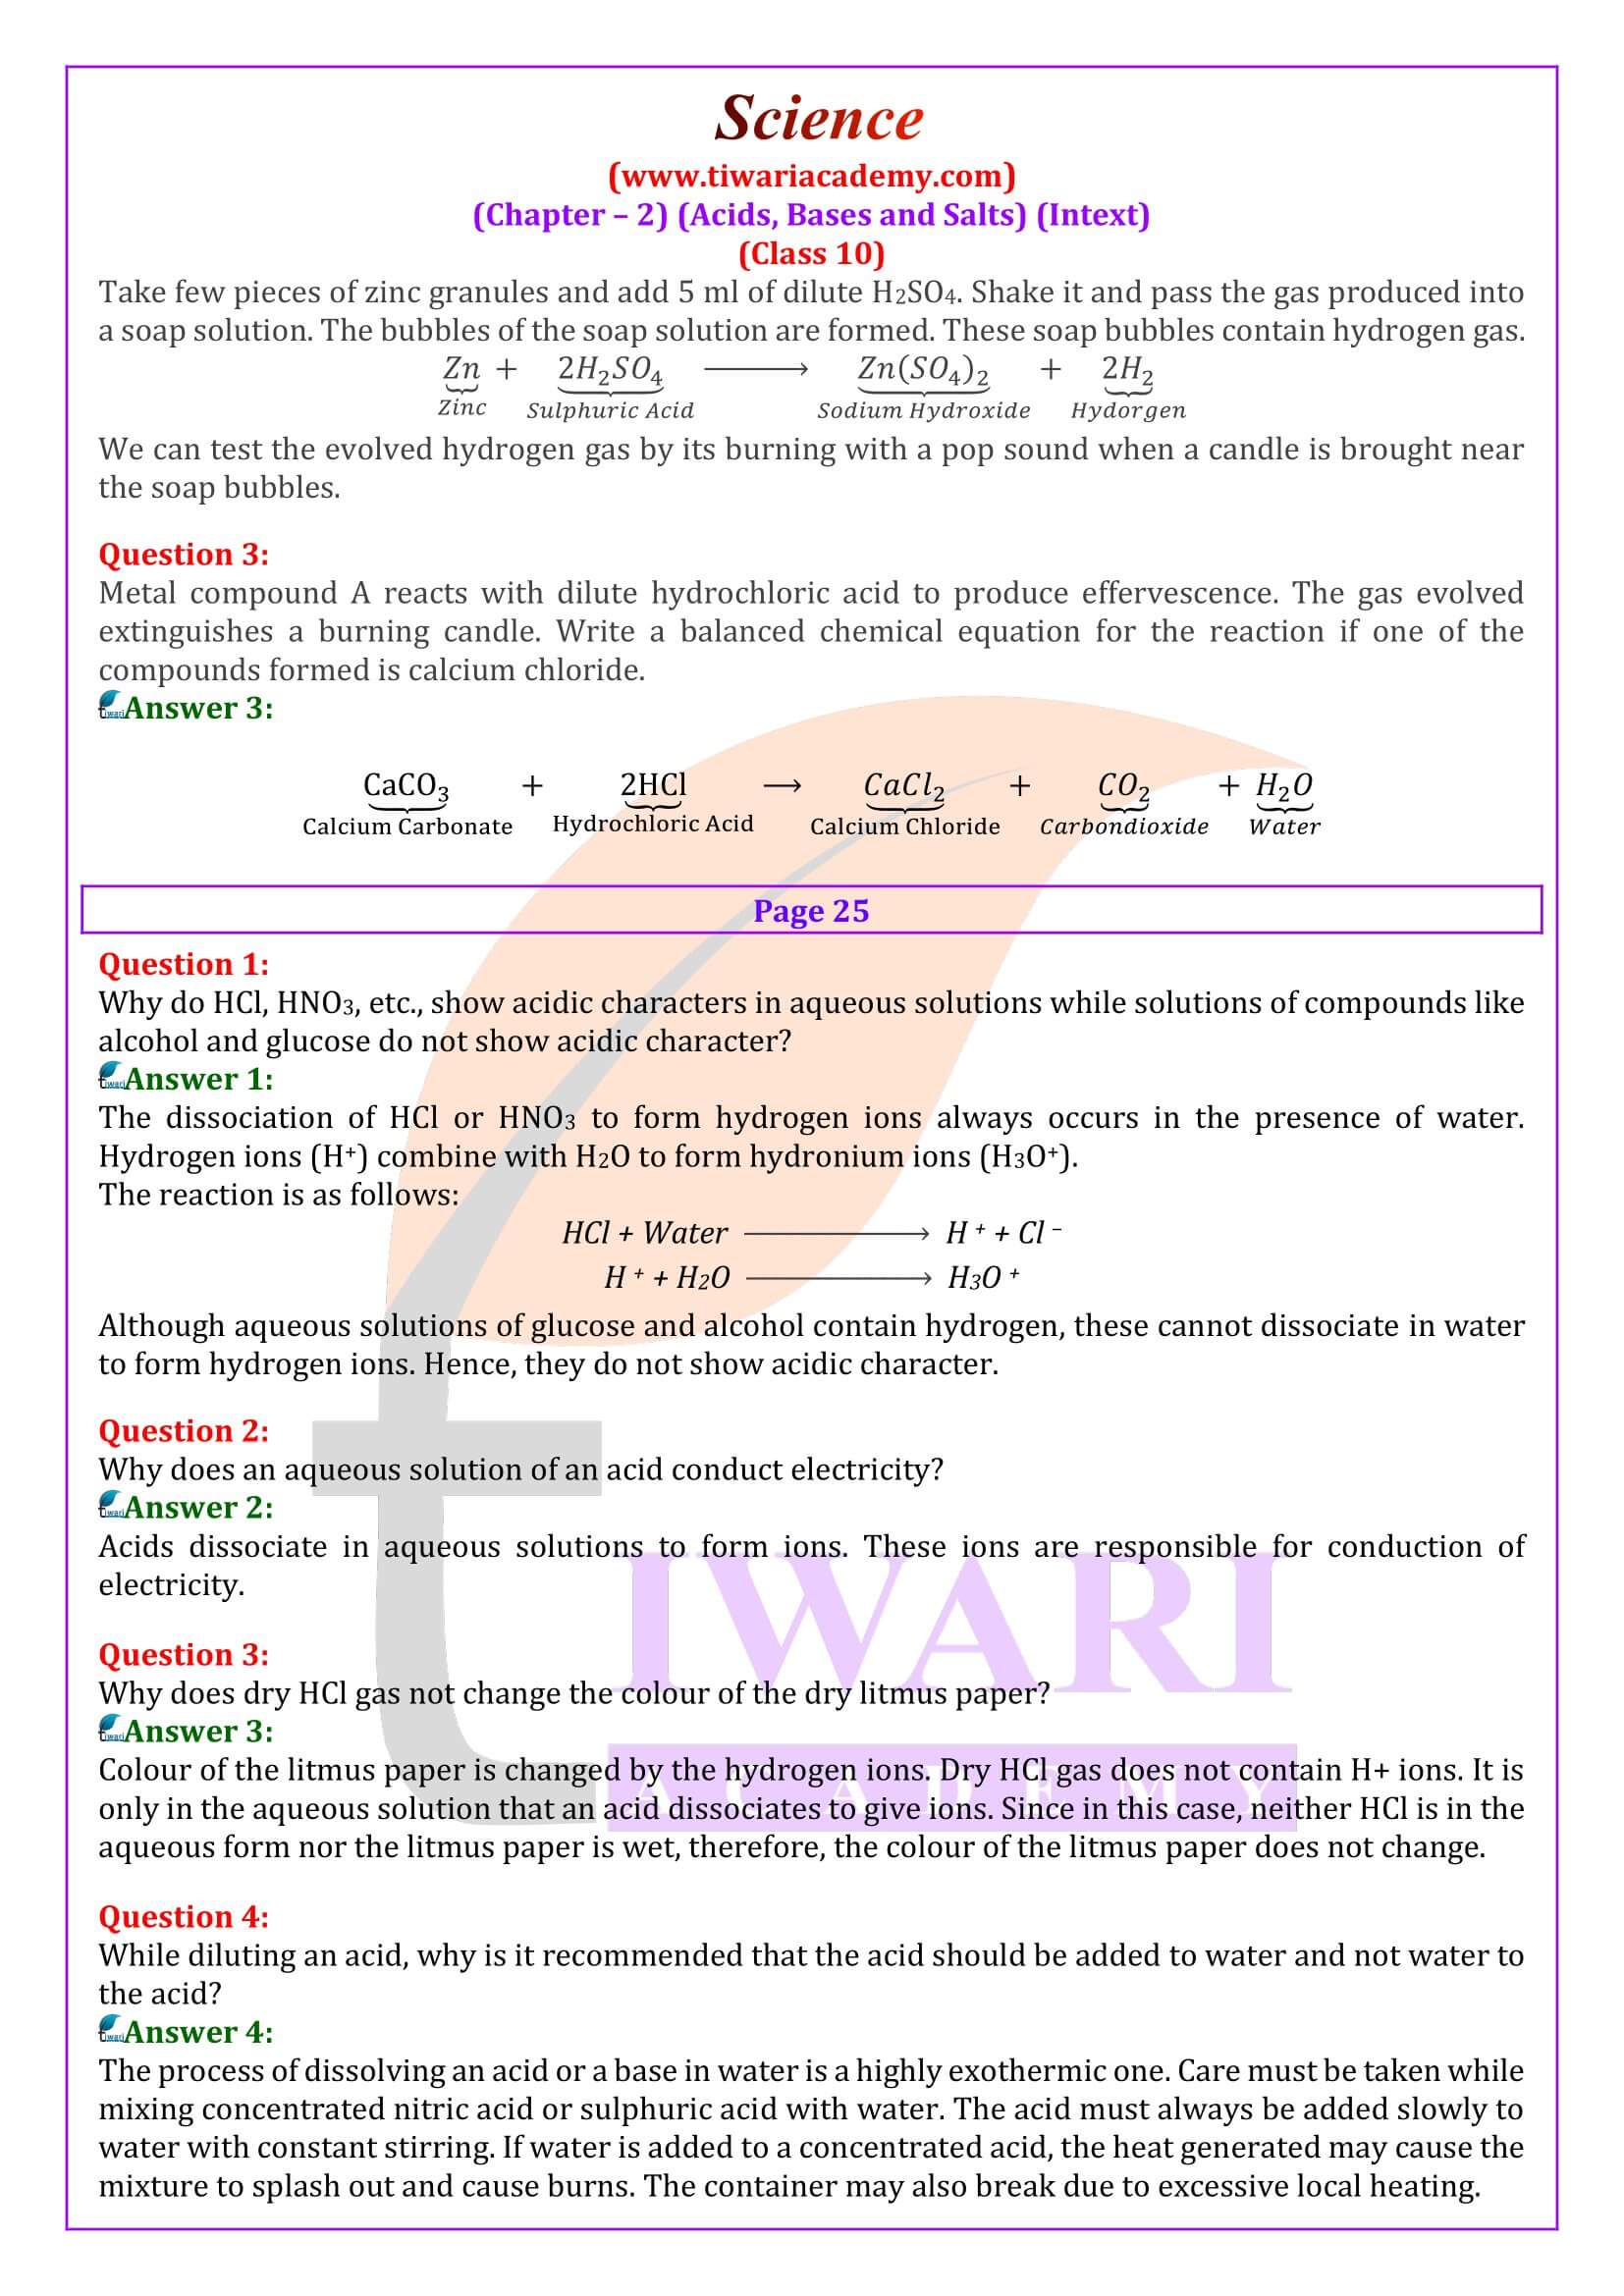 NCERT Solutions for Class 10 Science Chapter 2 Intext Questions